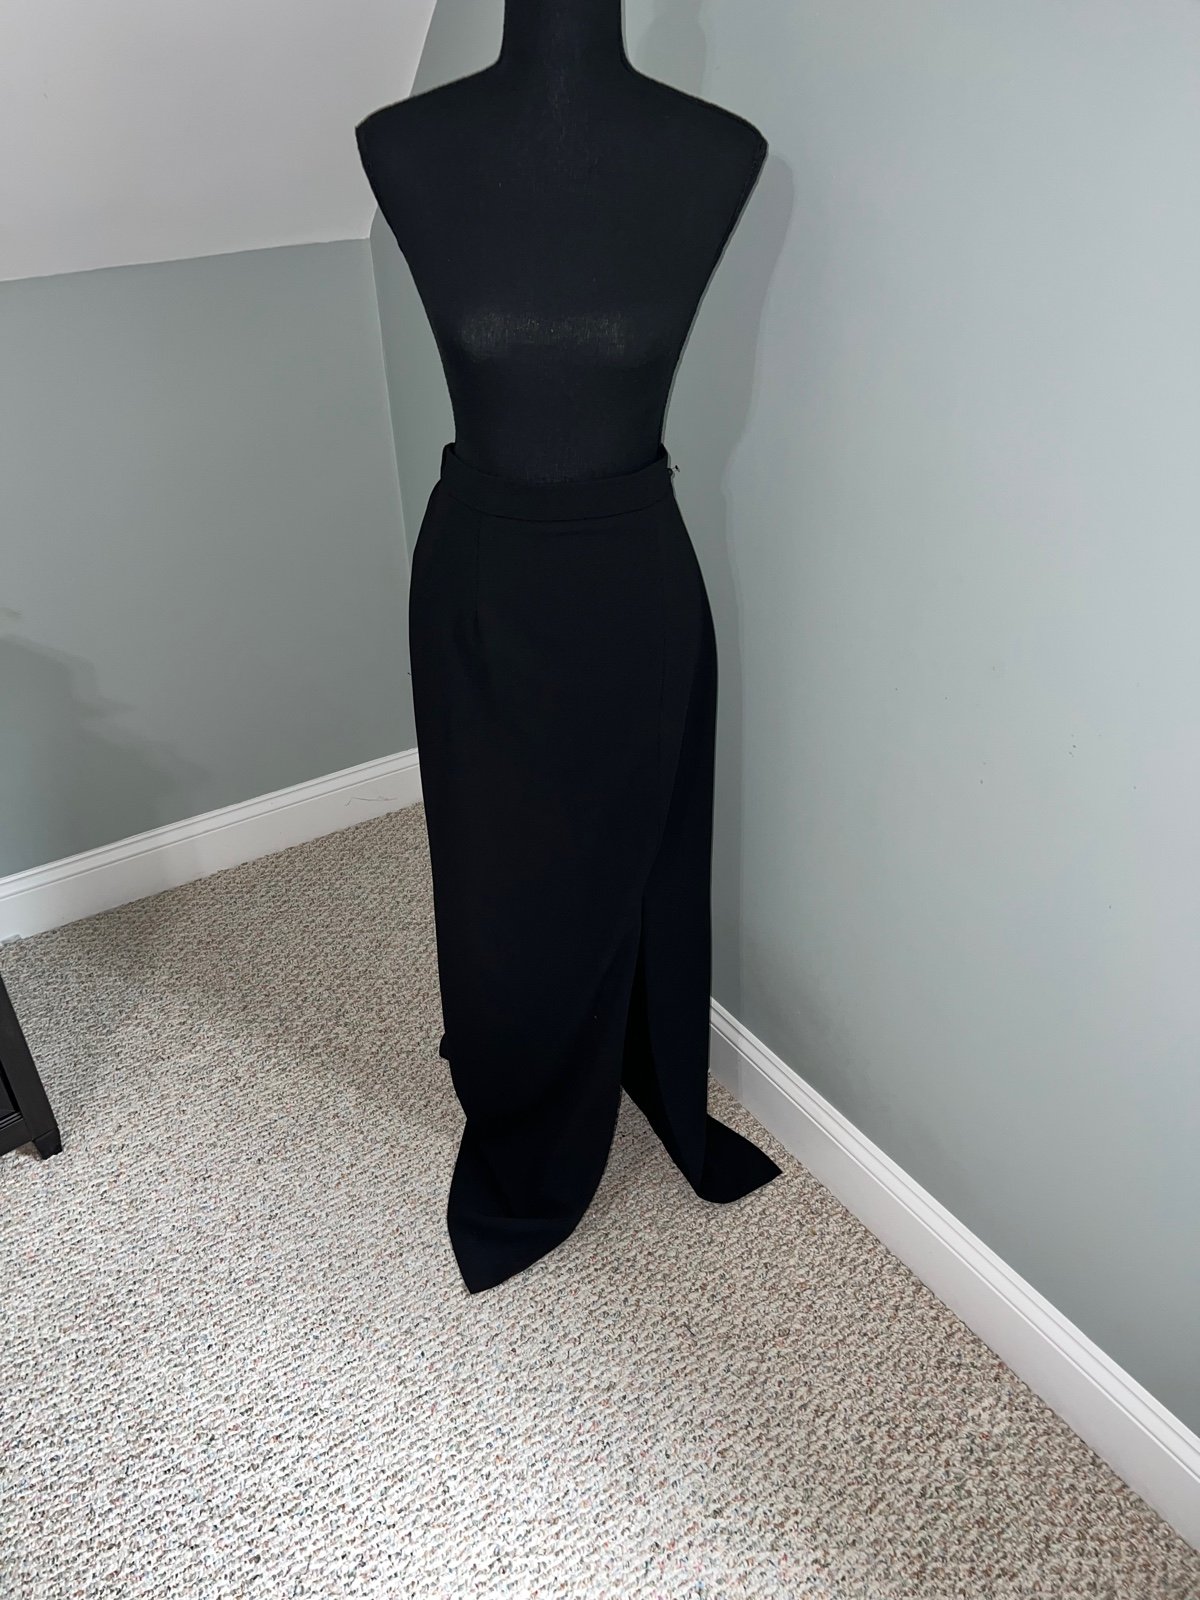 Buy Adrianna Papell Black Formal Maxi Skirt with slit size 10 GWagOfo36 Store Online